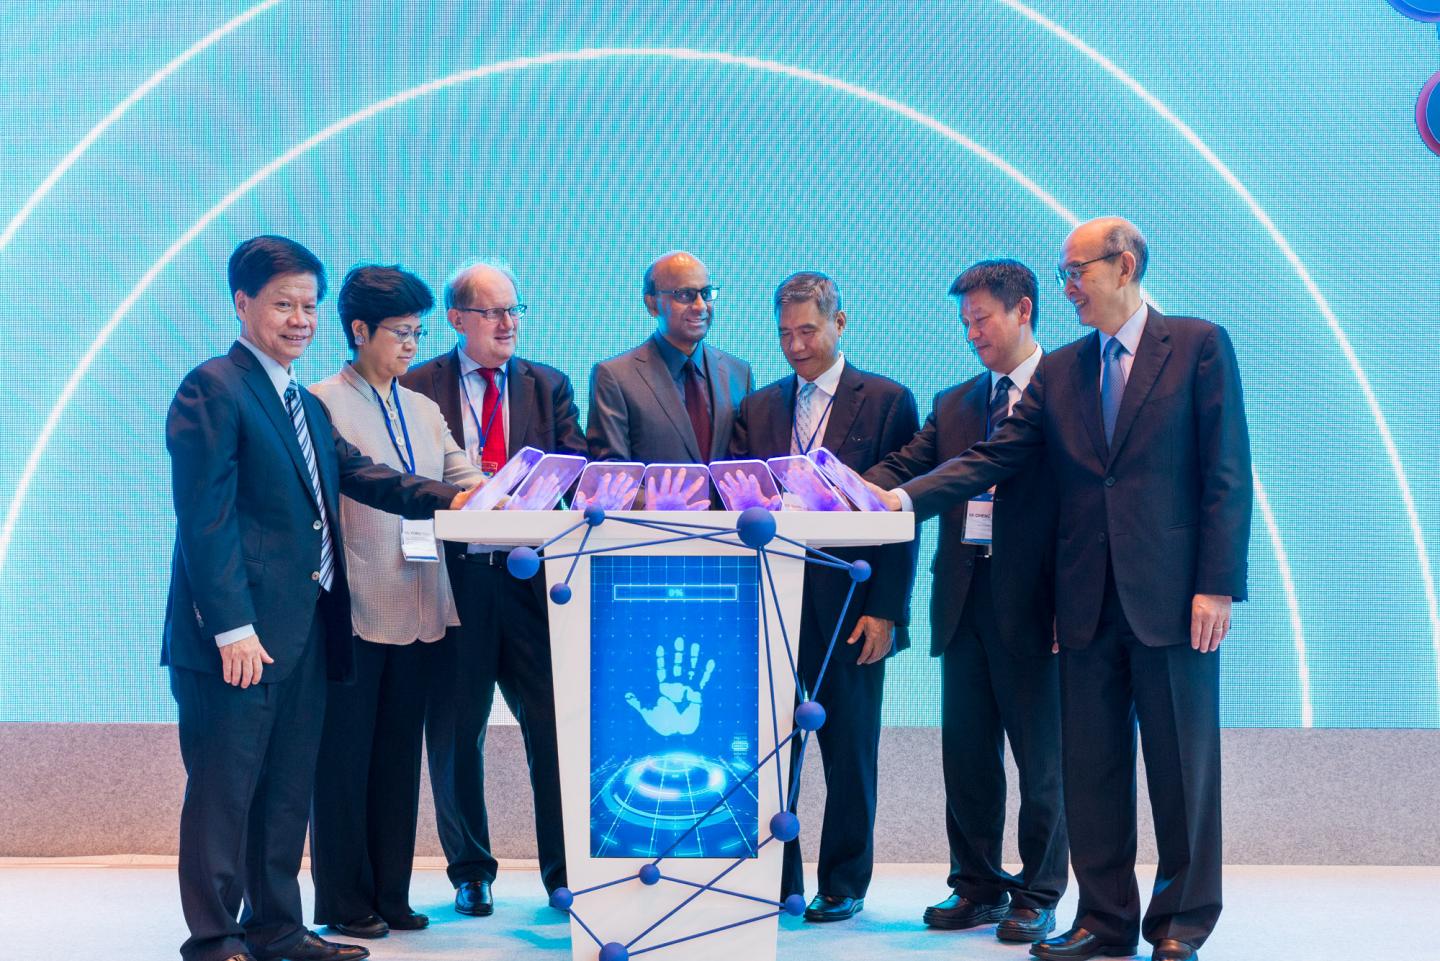 Launch of the New Delta-NTU Corporate Laboratory for Cyber-Physical Systems